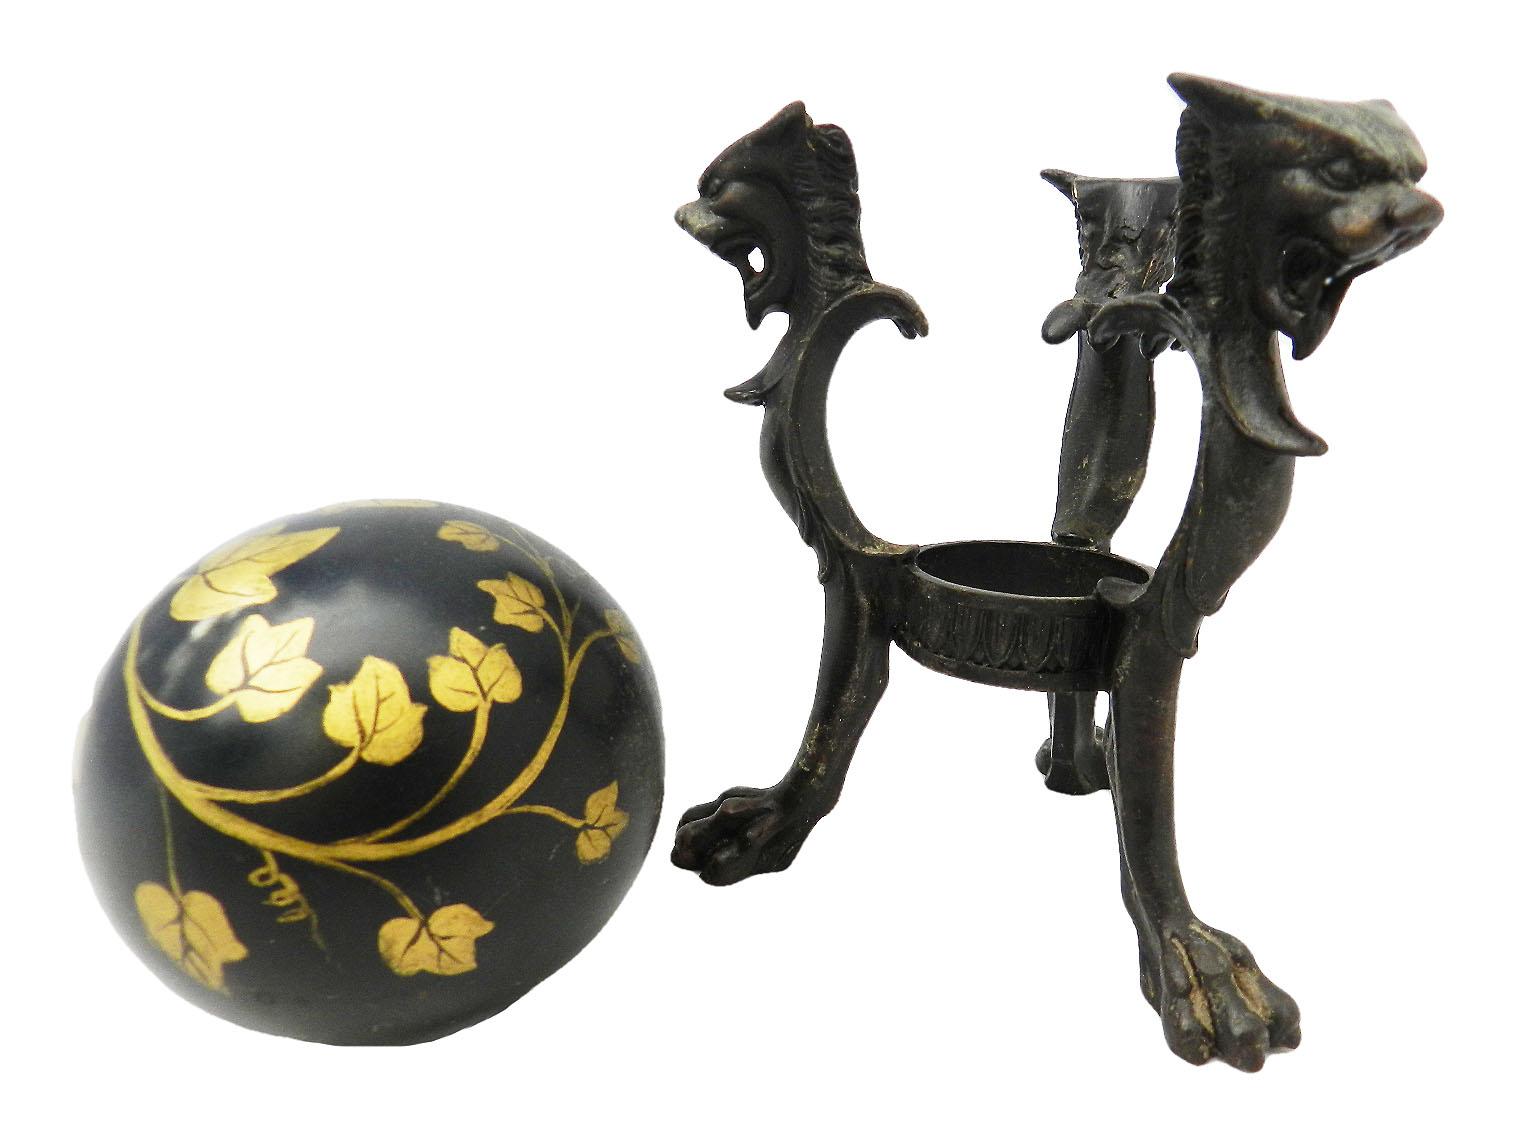 Pair of 19th century neoclassical bronze decorative tripod stands with chimera supporting a decorative ball painted with trailing Ivy
Stands have lion paw feet with dragon heads
Very unusual and handsome
The bronze stands have a good patina
Balls